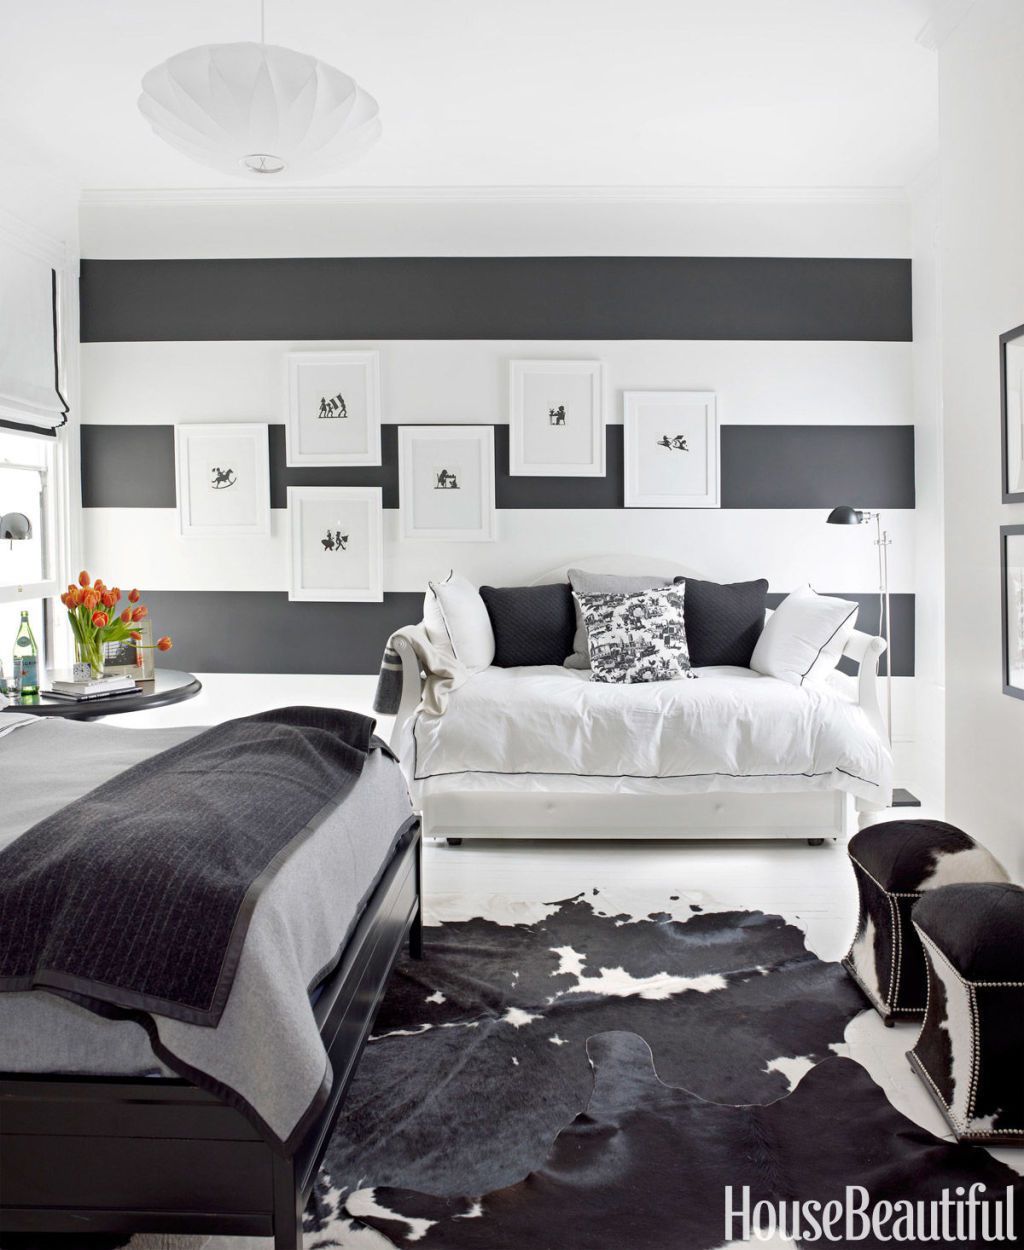 15 Beautiful Black And White Bedroom Ideas - Black And White Decor